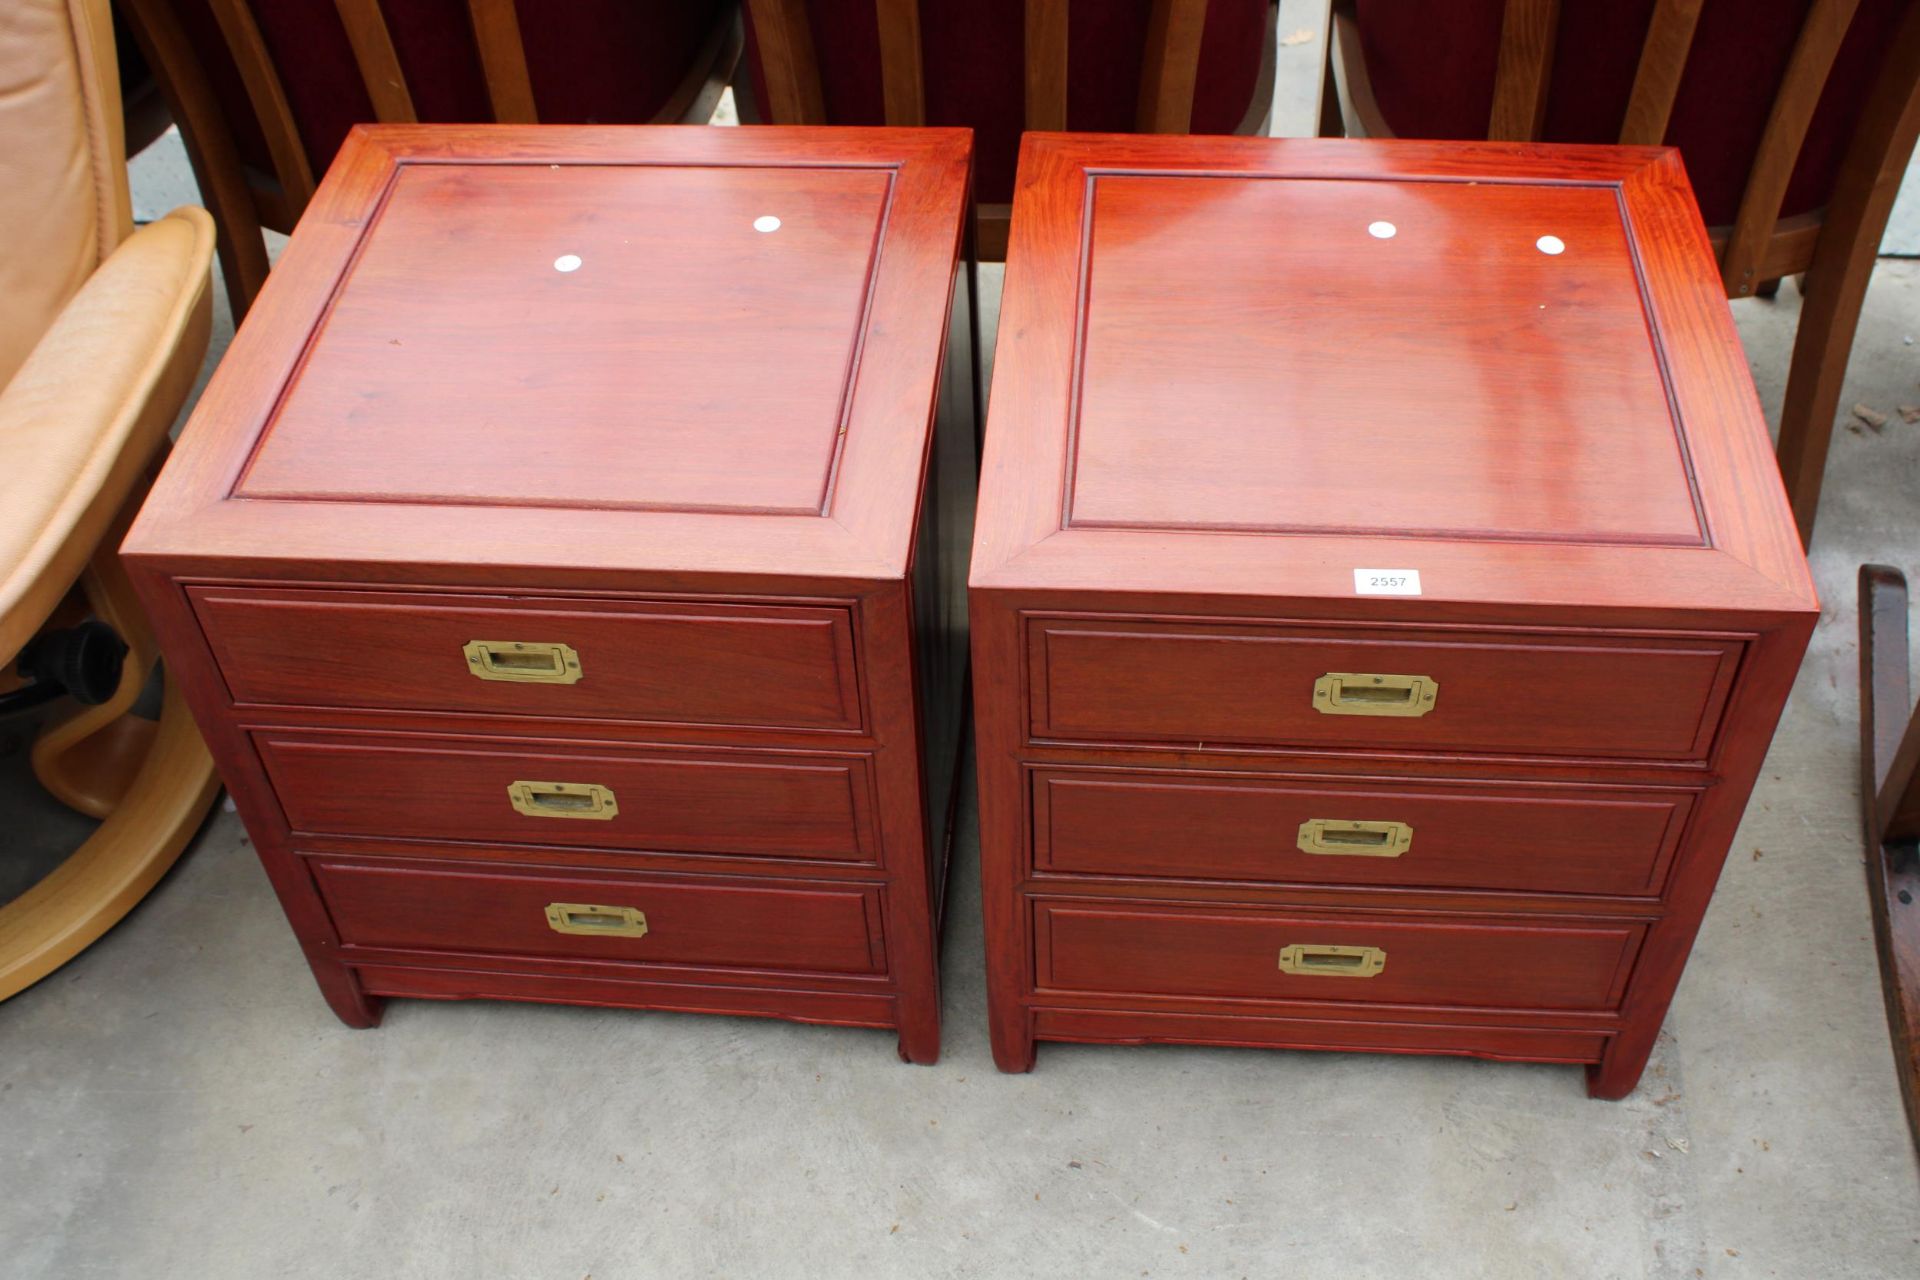 A PAIR OF MODERN HARDWOOD BEDSIDE CHESTS WITH THREE DRAWERS AND BRASS CAMPAIGN STYLE HANDLES